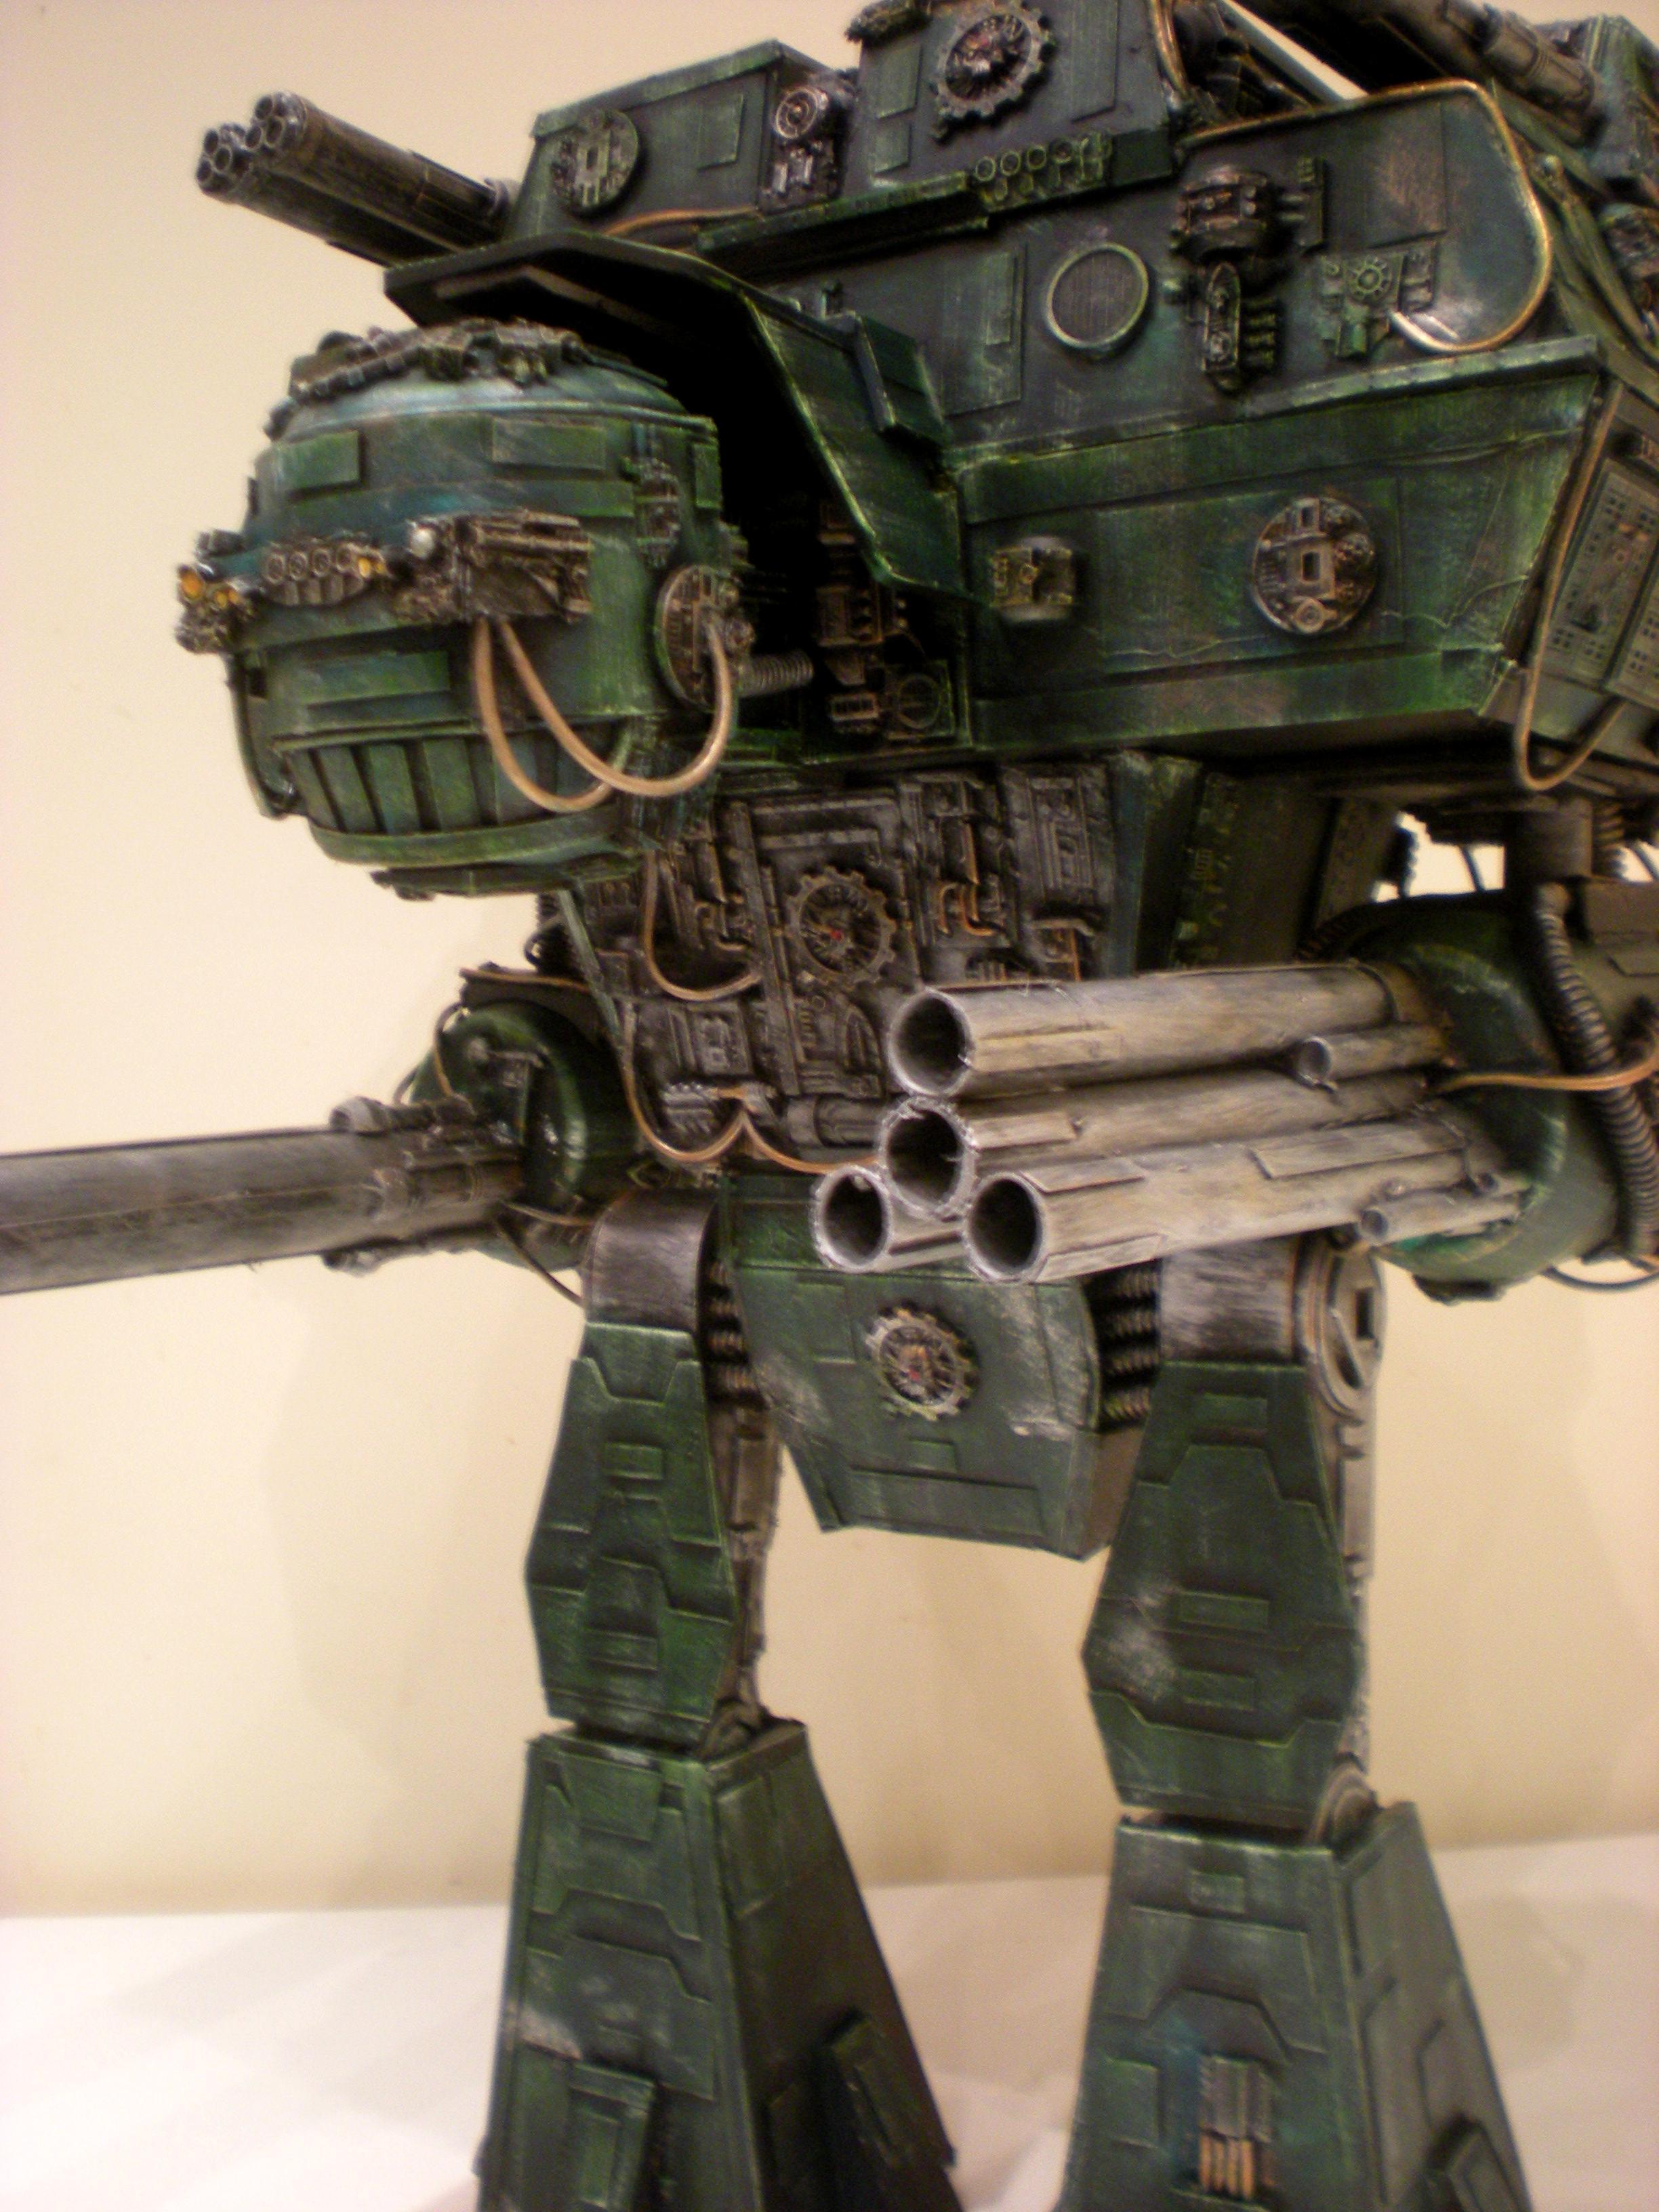 For Sale, Scratch Build, Titan, Warlord, Warlord Titan Space Marine Gian Scratch Built For Sale